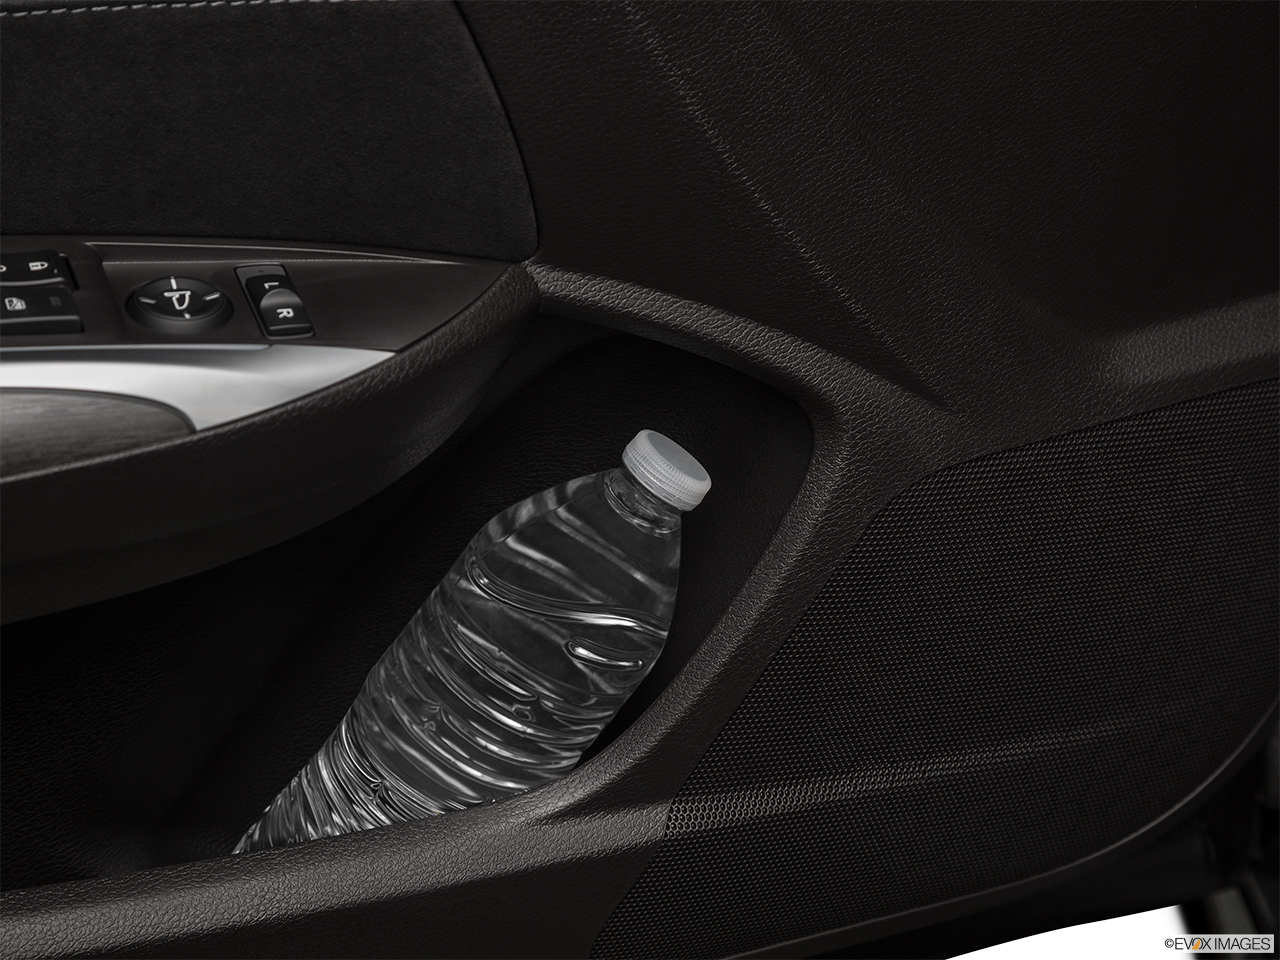 2020 Acura TLX 3.5L Cup holder prop (tertiary). 